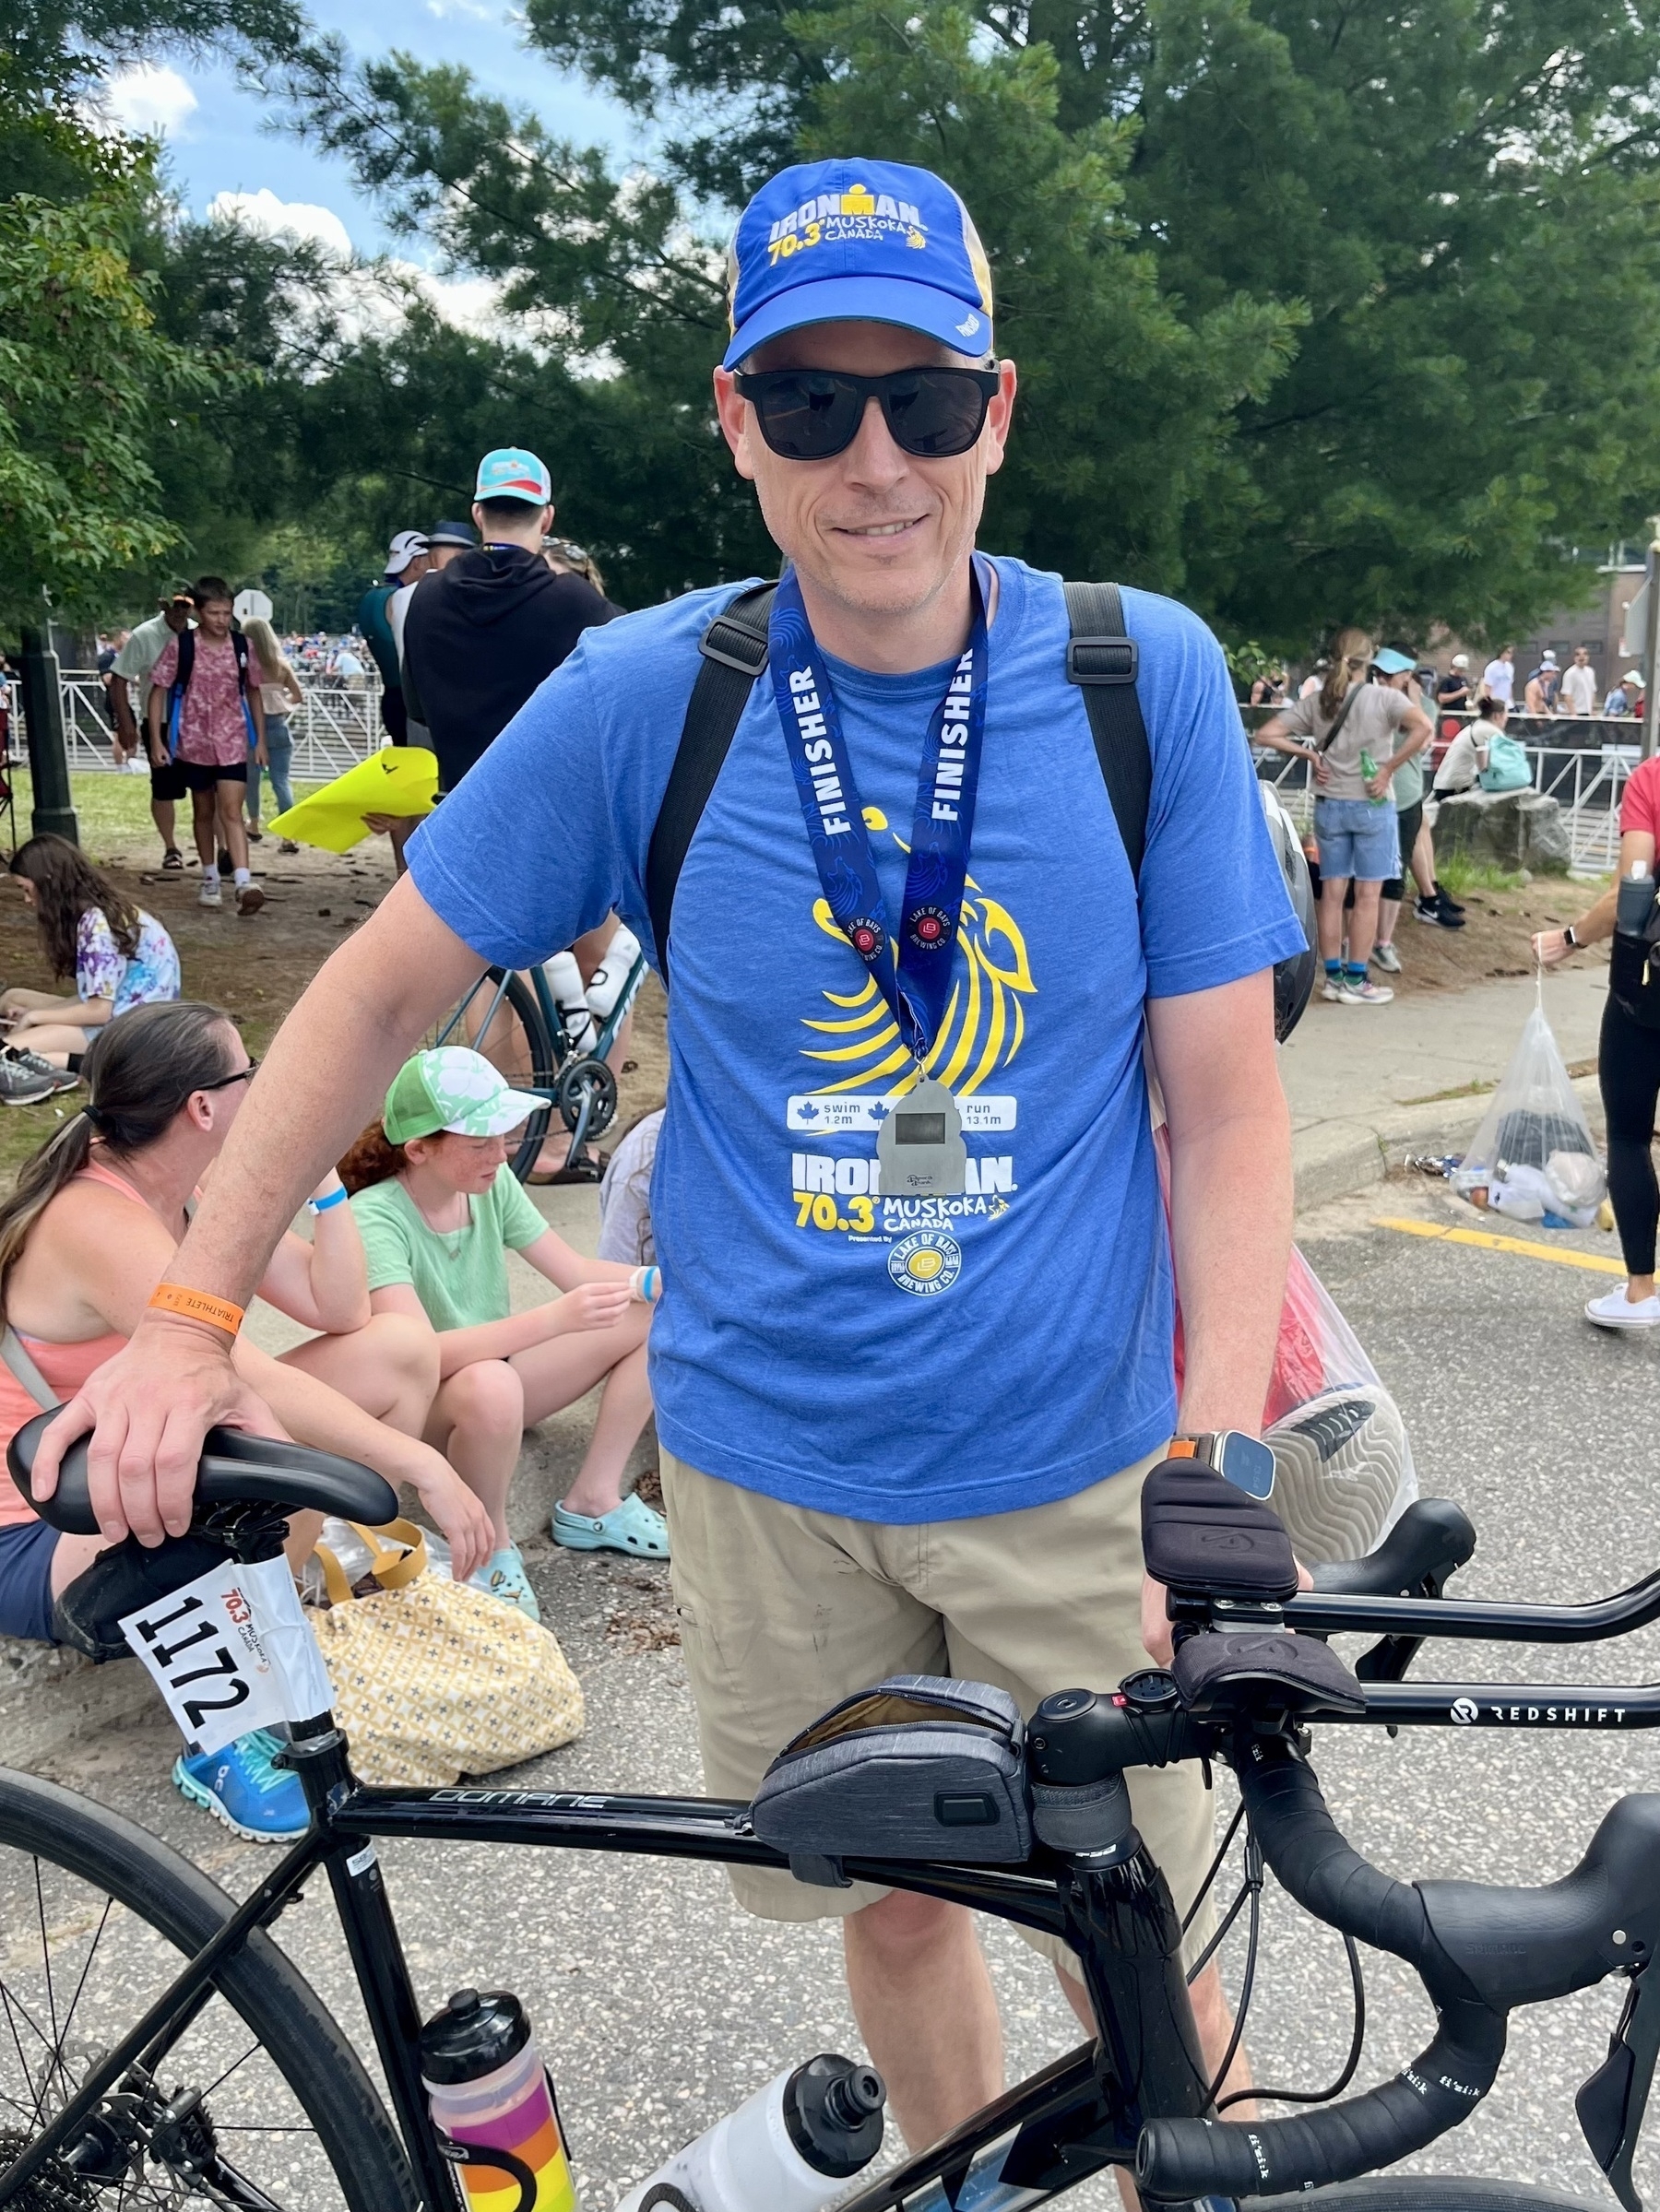 Auto-generated description: A man wearing blue finisher merchandise poses with his bicycle after completing an Ironman 70.3 triathlon event, with spectators in the background.